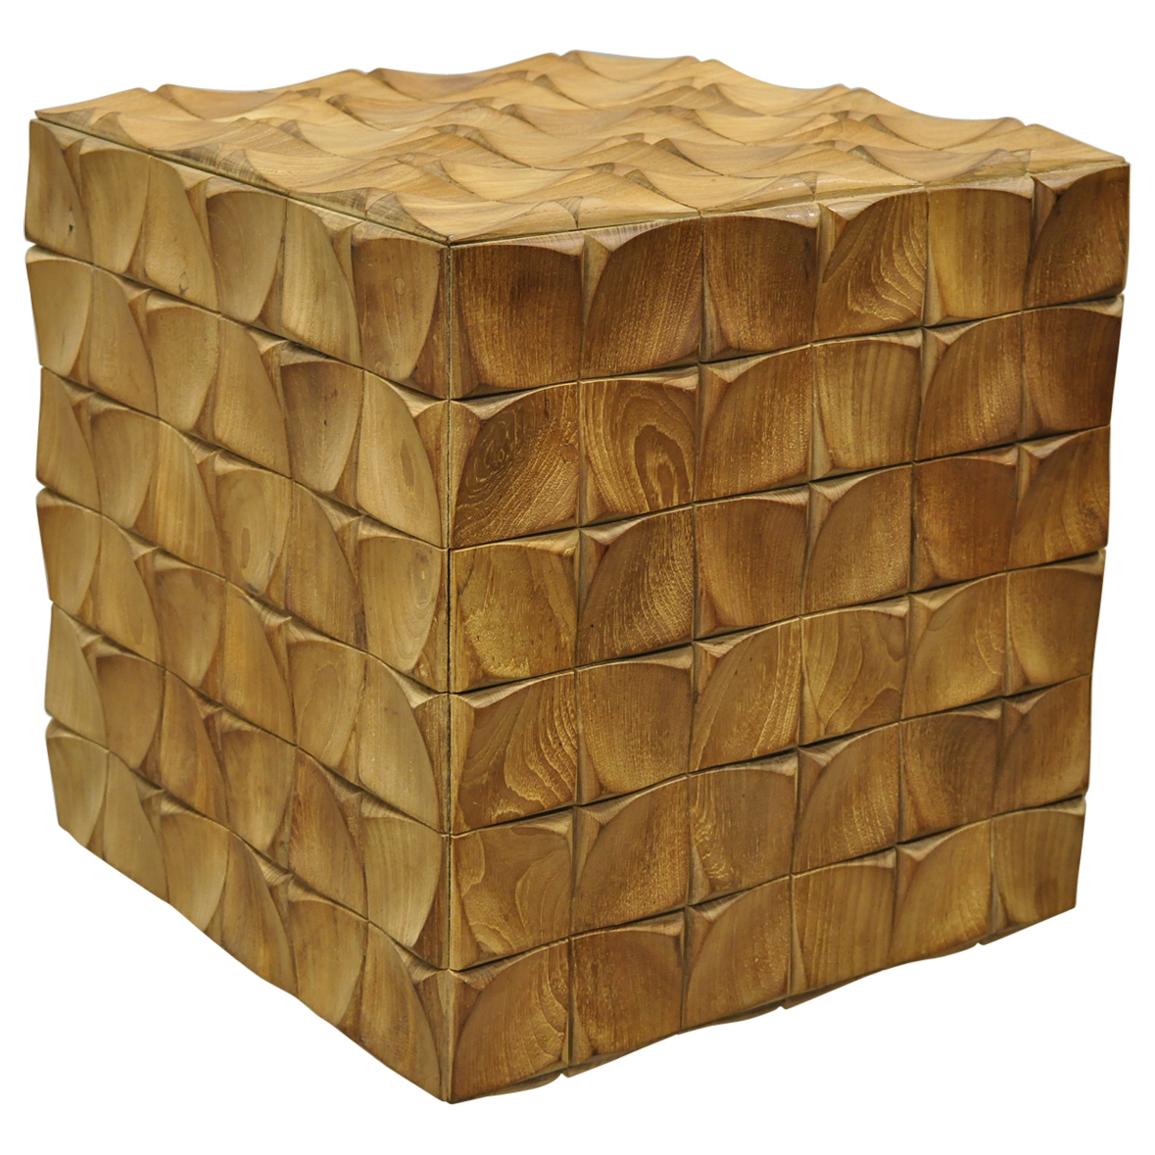 3 Dimensional Geometric Wood Carved Modern Cube Ottoman Stool Square Side Table